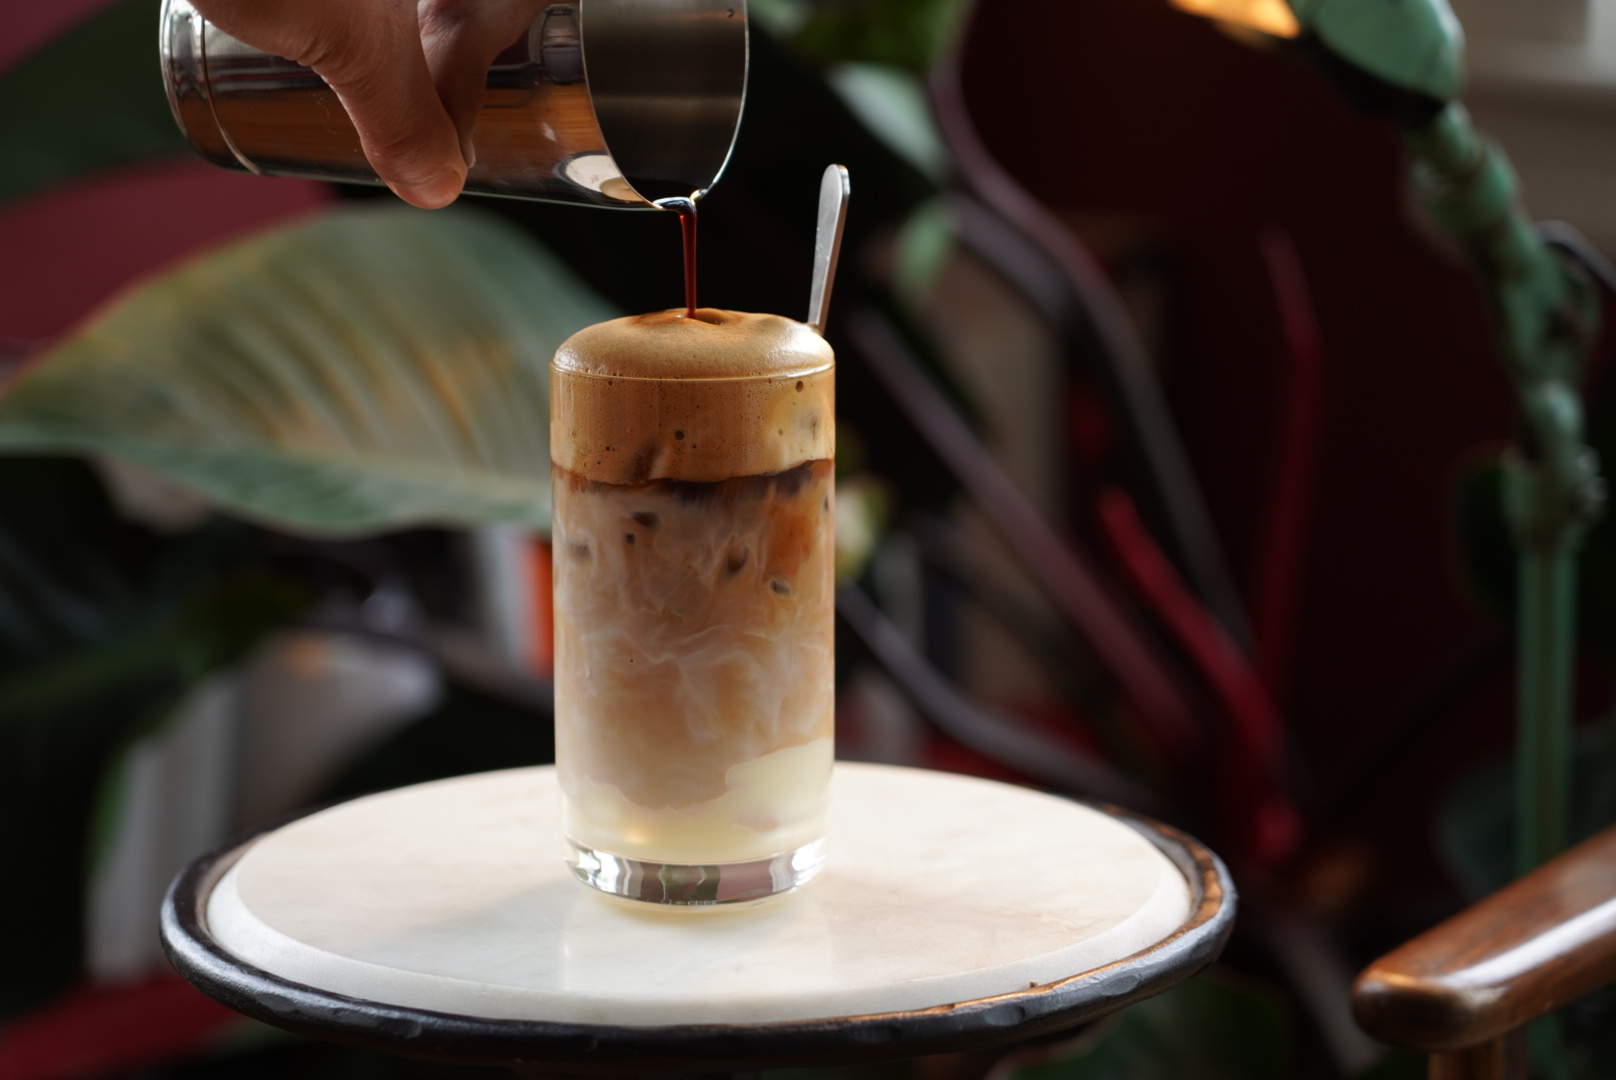 A hand pours liquid into a glass full of a foamy, milky iced coffee on a small white table. Plants are visible in the background.